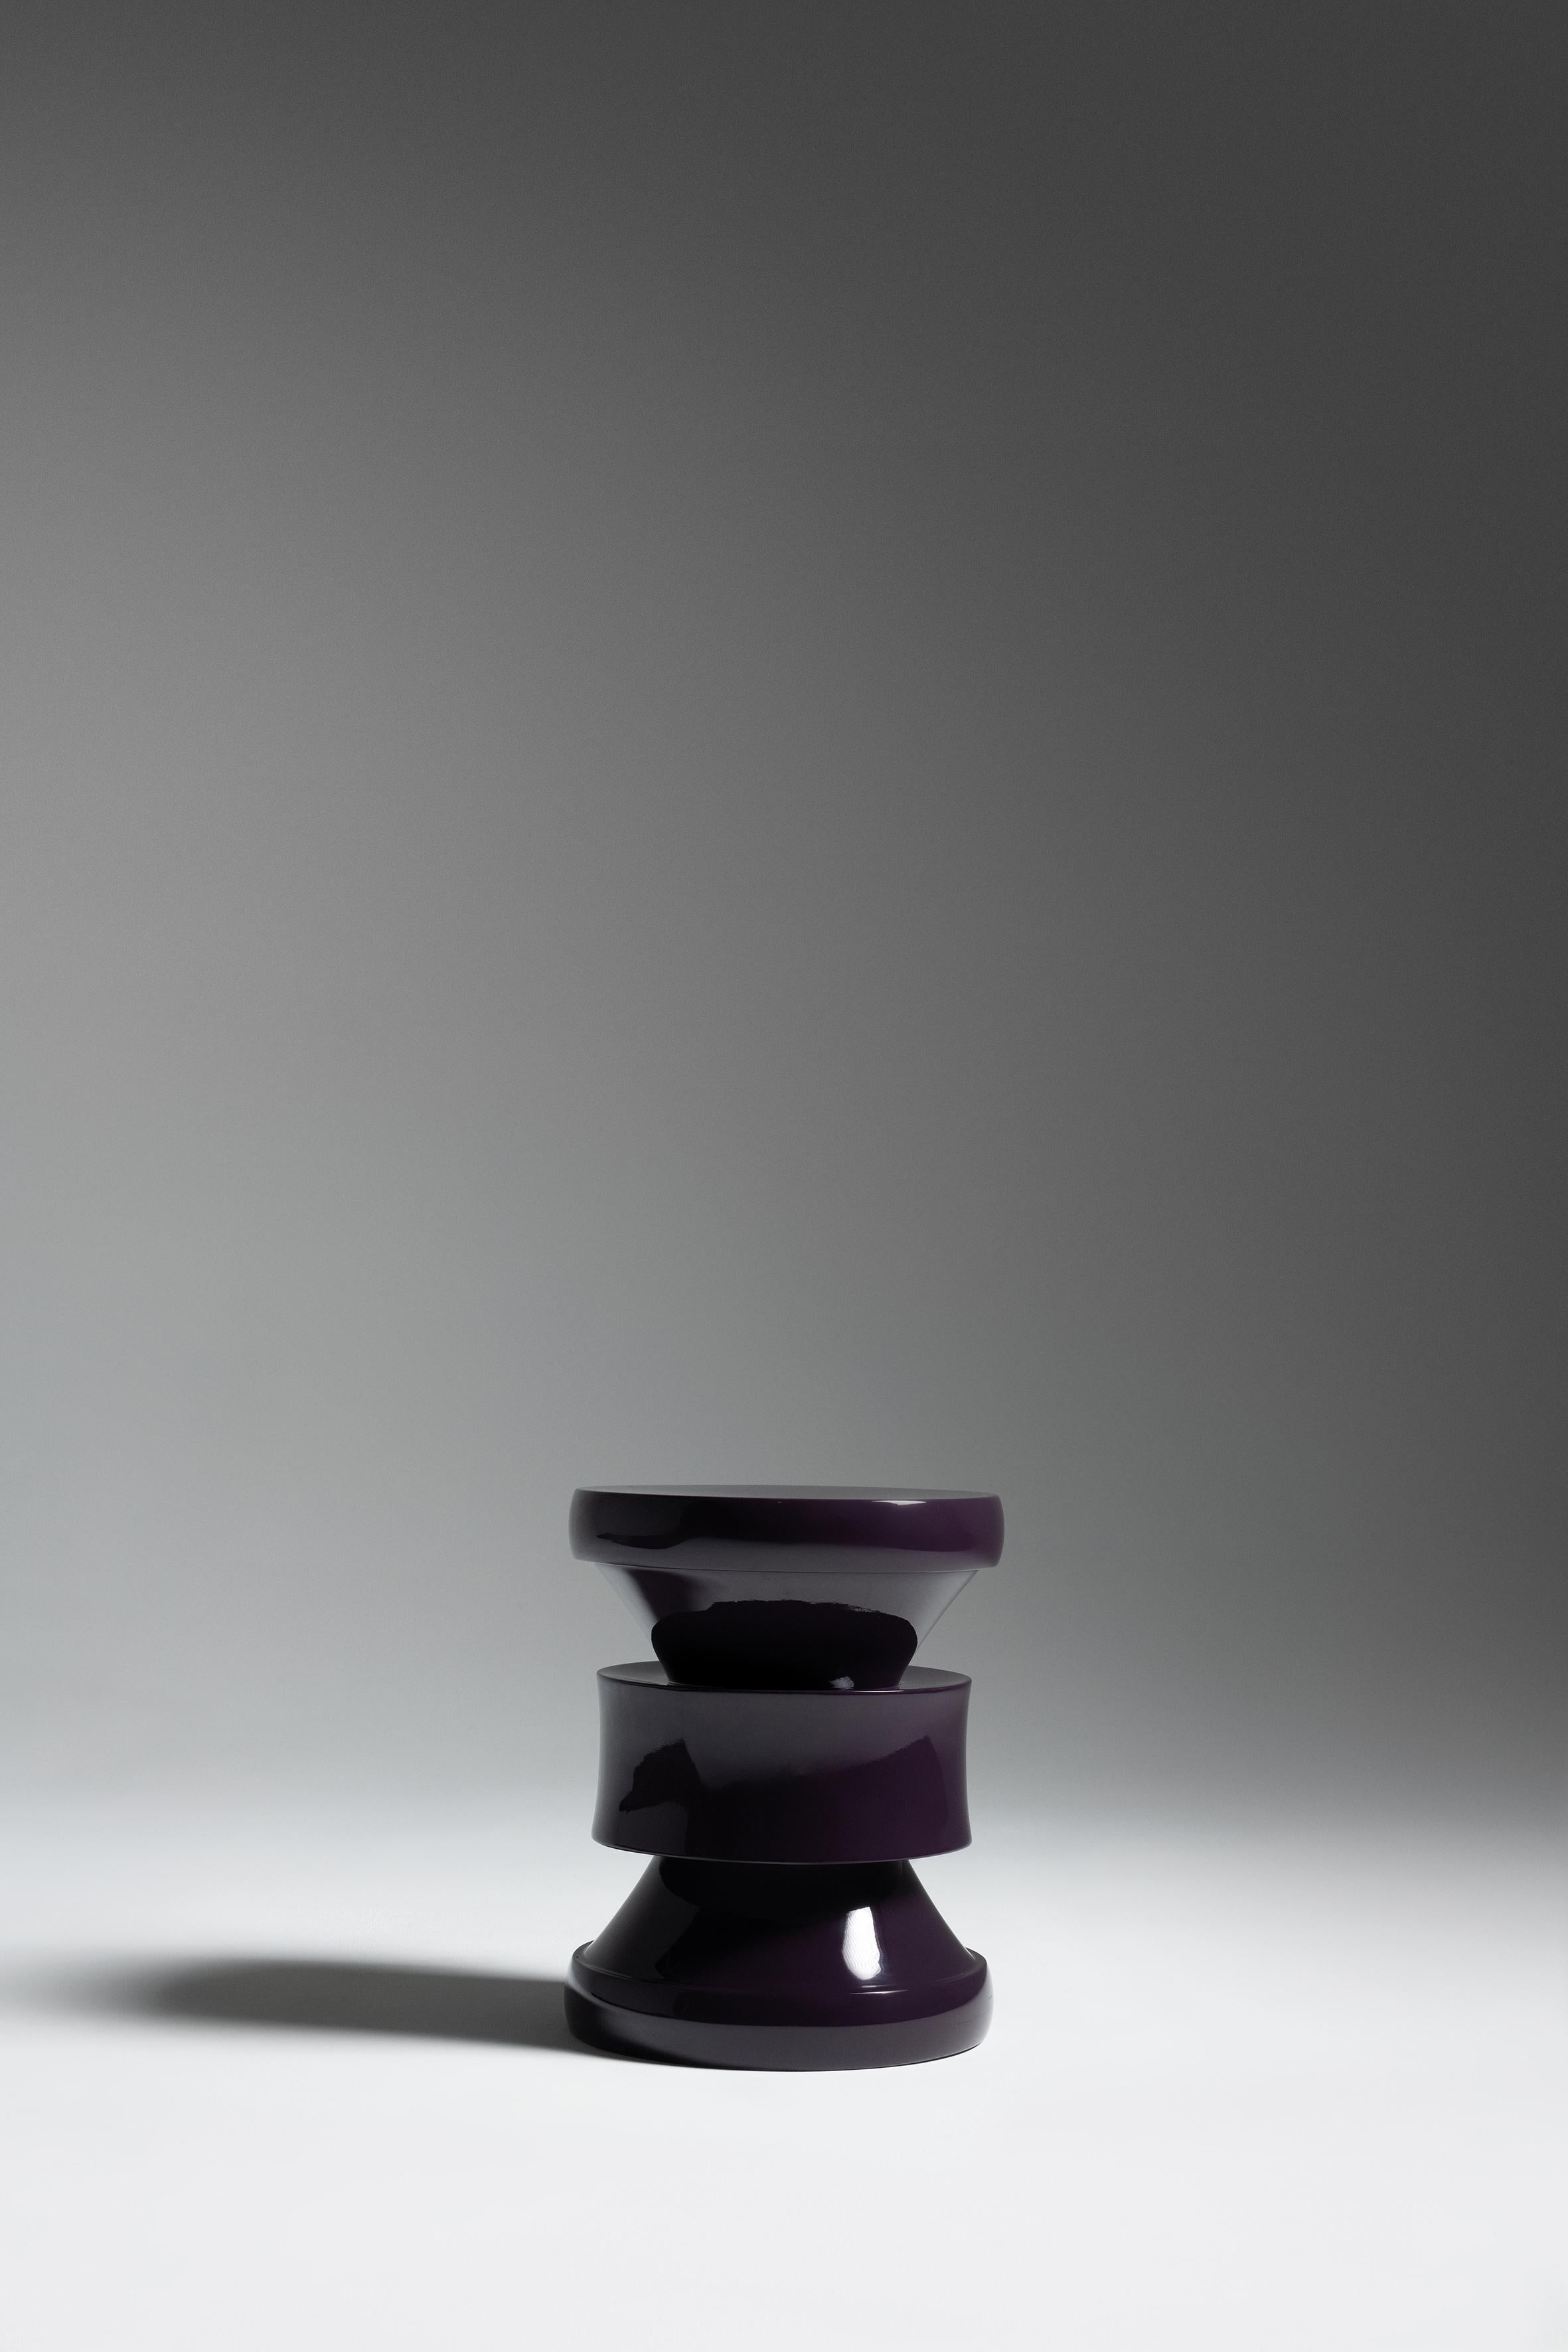 Wood Barth Stool Lacquered, France, Le Berre Vevaud For Sale